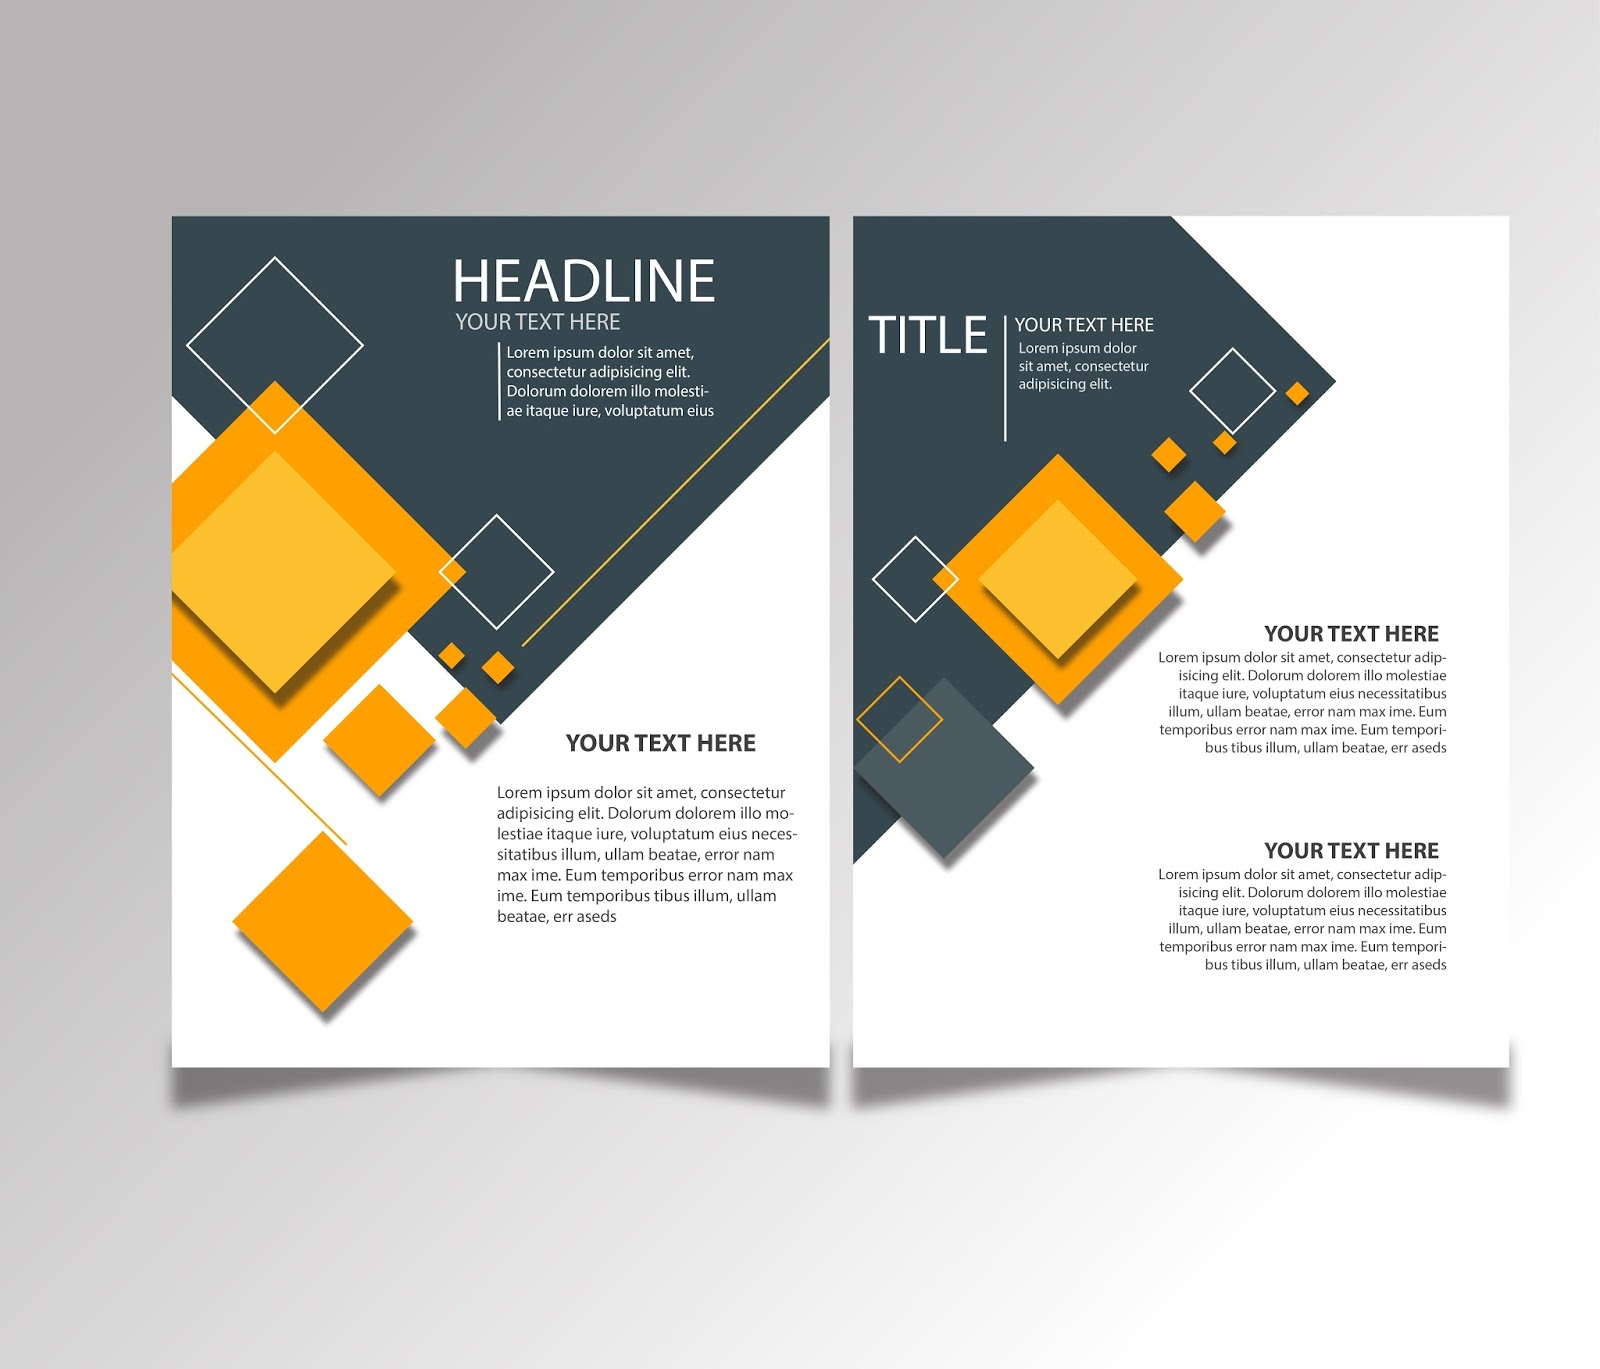 FREE DOWNLOAD BROCHURE DESIGN TEMPLATES AI FILES - Ideosprocess Within Creative Brochure Templates Free Download